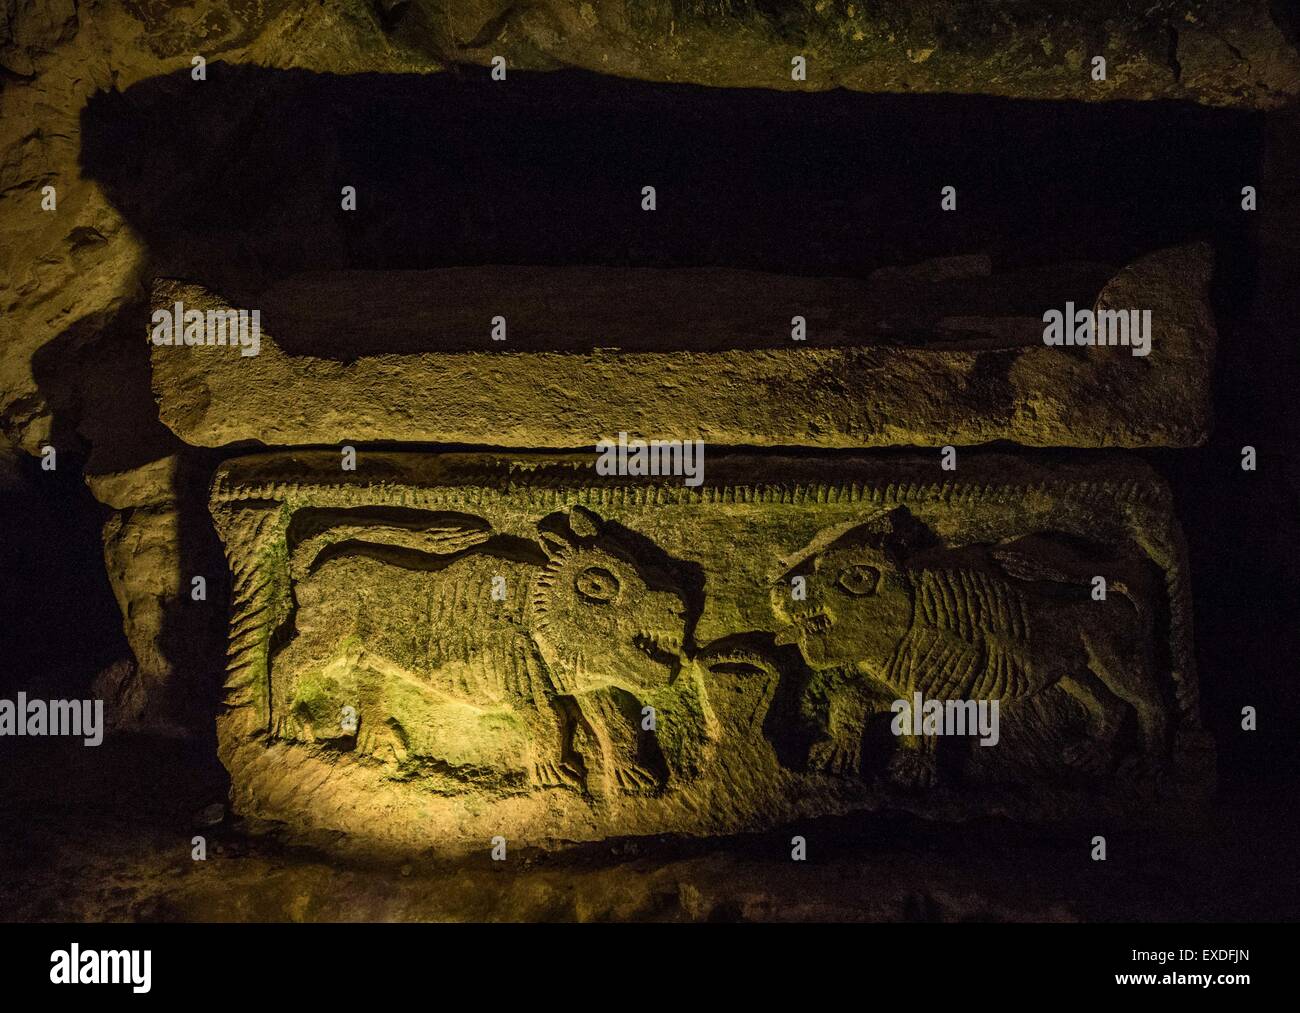 (150712) -- BET SHE'ARIM, July 12, 2015 (Xinhua) -- Carved animals are seen on a sarcophagus in the cave of the coffins at Necropolis of Bet She'arim in Israel, on July 11, 2015. Necropolis of Bet She'arim in Israel, the landmark of Jewish Renewal, was inscribed on the UNESCO World Heritage List on July 4, 2015. Consisting of a series of catacombs, the necropolis developed from the 2nd century BCE as the primary Jewish burial place outside Jerusalem following the failure of the second Jewish revolt against Roman rule. Located southeast of the city of Haifa, these catacombs are a treasury of ar Stock Photo